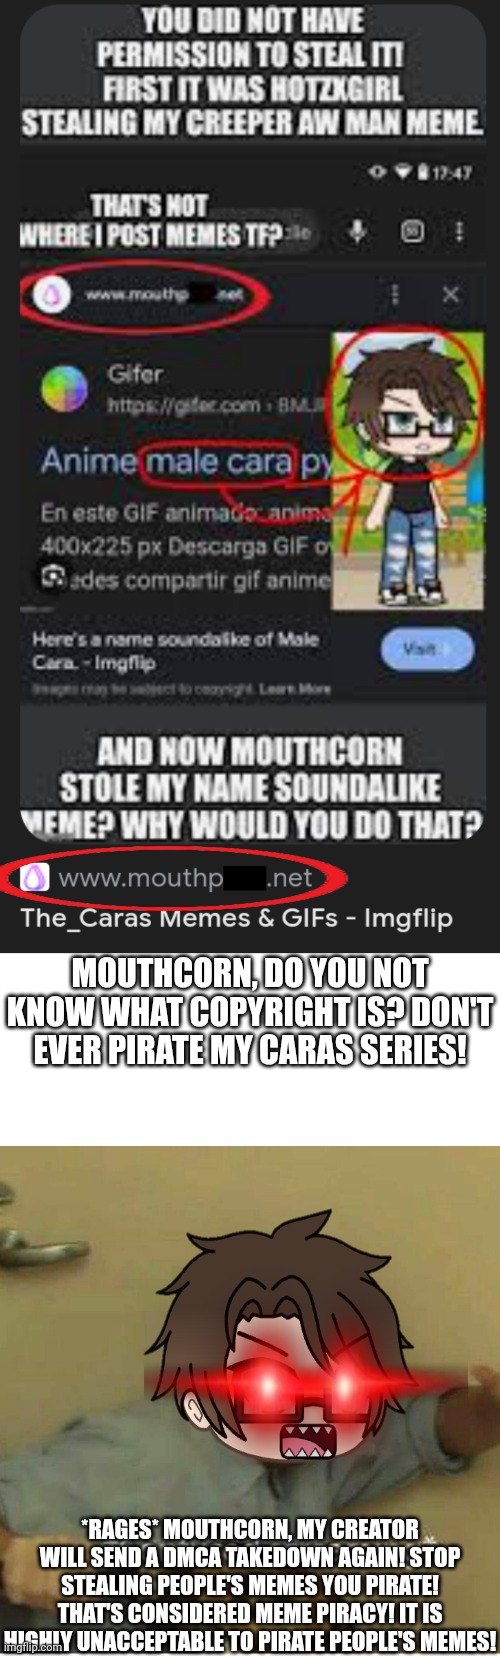 Mouthcorn is a meme pirate. THEY PIRATED MY CARAS SERIES! I'm super mad at them... | MOUTHCORN, DO YOU NOT KNOW WHAT COPYRIGHT IS? DON'T EVER PIRATE MY CARAS SERIES! *RAGES* MOUTHCORN, MY CREATOR WILL SEND A DMCA TAKEDOWN AGAIN! STOP STEALING PEOPLE'S MEMES YOU PIRATE! THAT'S CONSIDERED MEME PIRACY! IT IS HIGHLY UNACCEPTABLE TO PIRATE PEOPLE'S MEMES! | image tagged in confused screaming,male cara,copyright,meme stealing license,memes | made w/ Imgflip meme maker